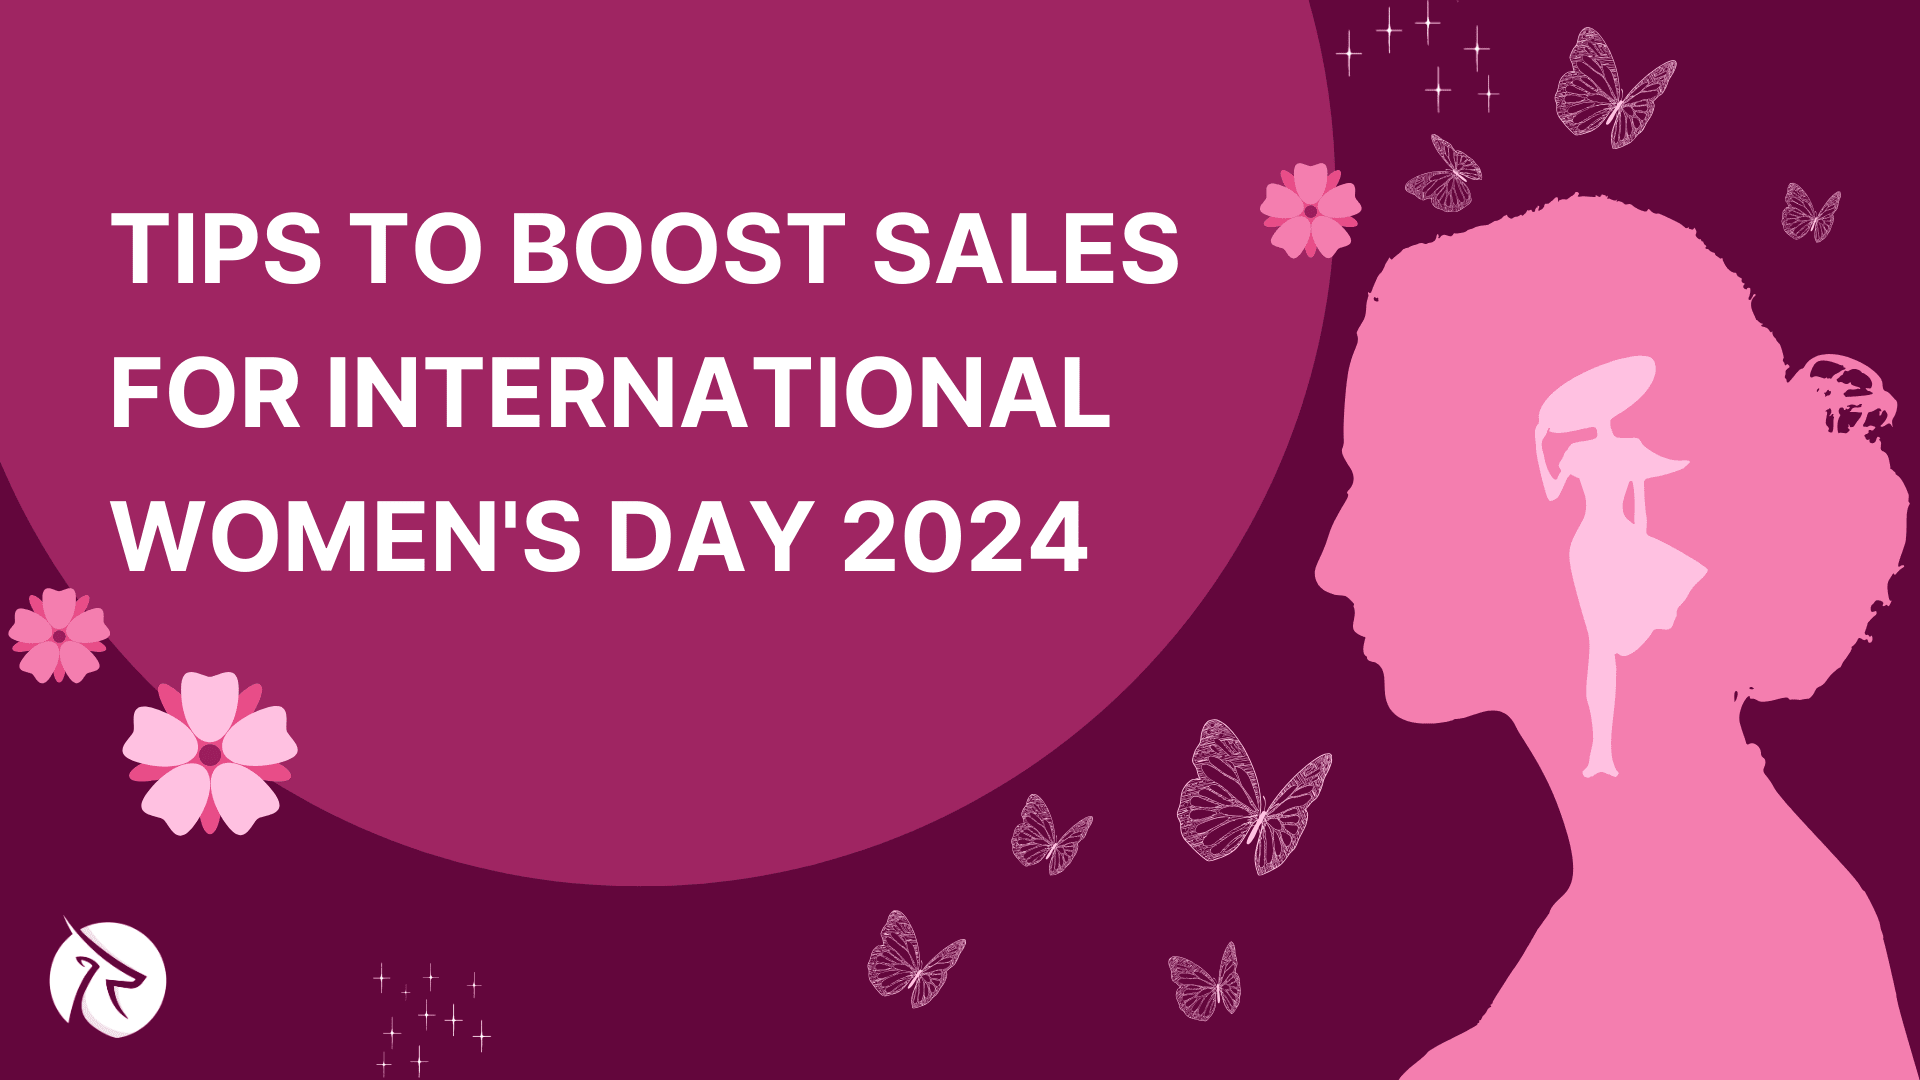 Tips to boost sales for International Women's Day 2024